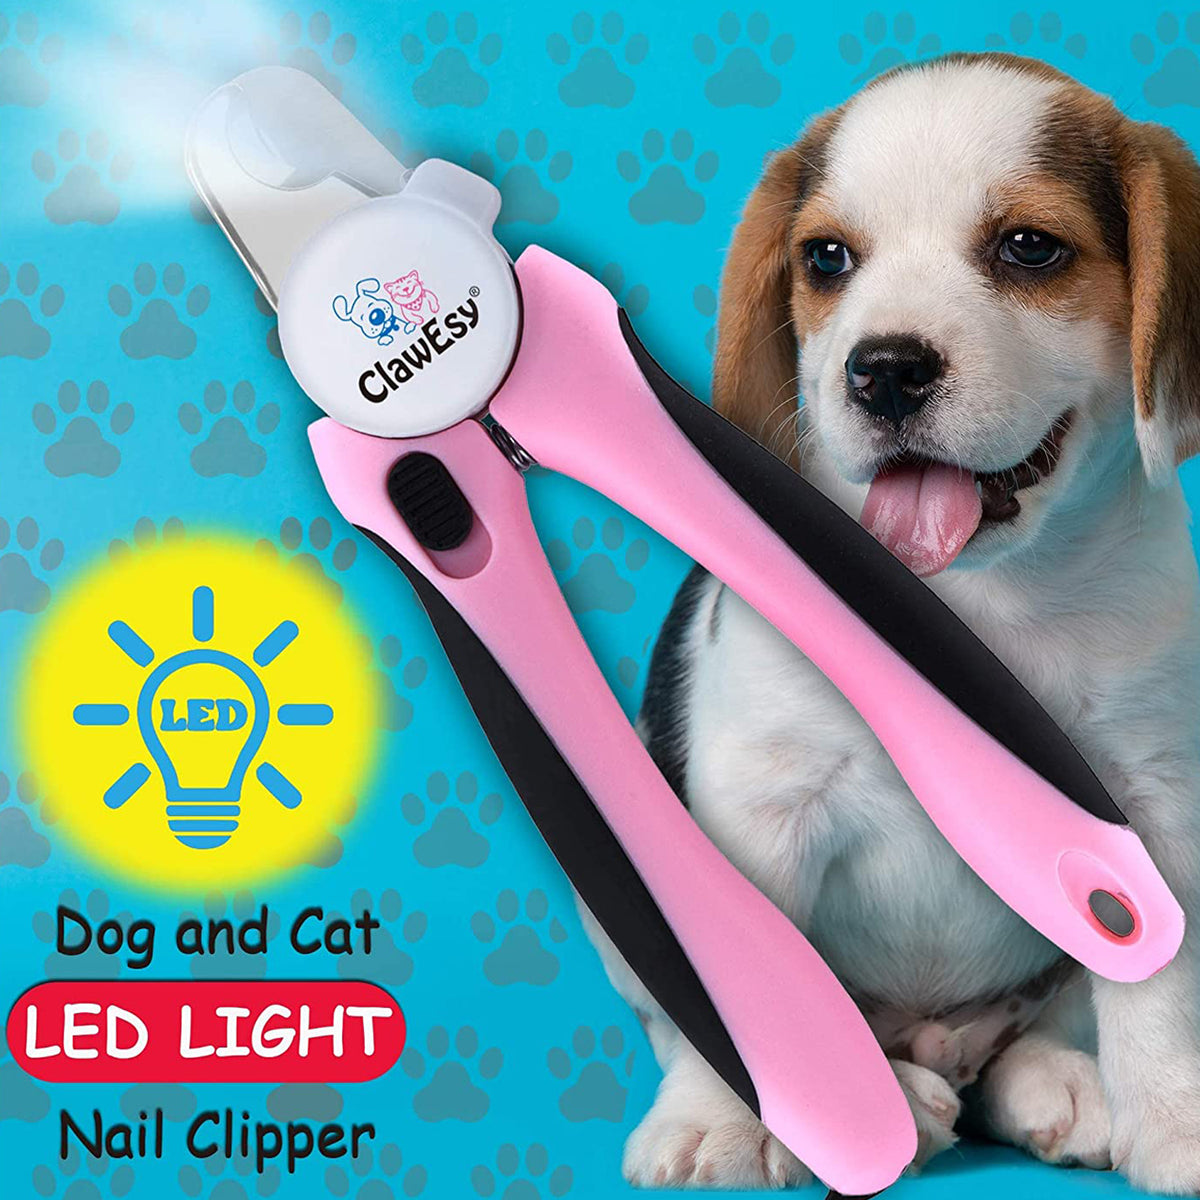 CLAWESY - LED Dog Nail Clipper, Dog Clippers, Professional Dog Clippers, Cat Nail Clippers, Cat Nail Clippers with Safety Guard, Dog Nail Polish, Nail Trimmer with Light, 1 Nail File